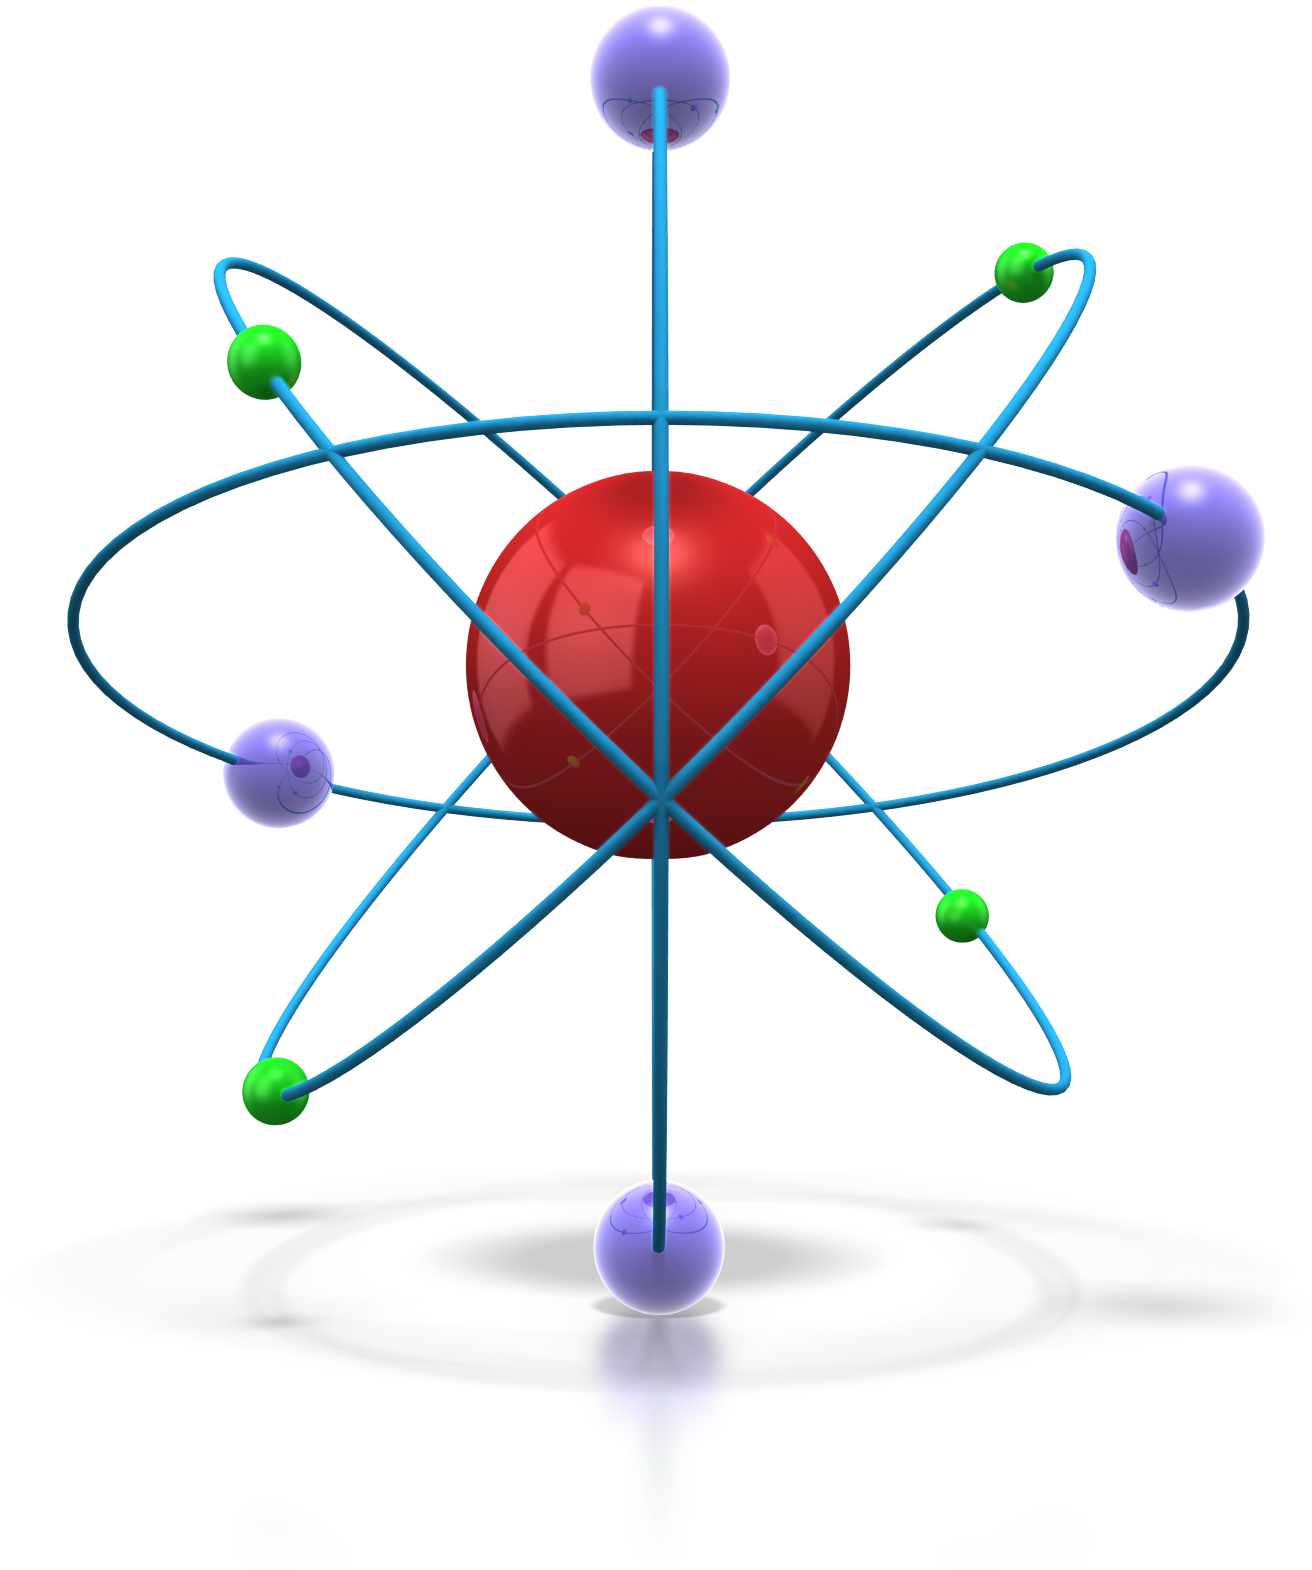 A Red Sphere With Blue Lines And Spheres Around It